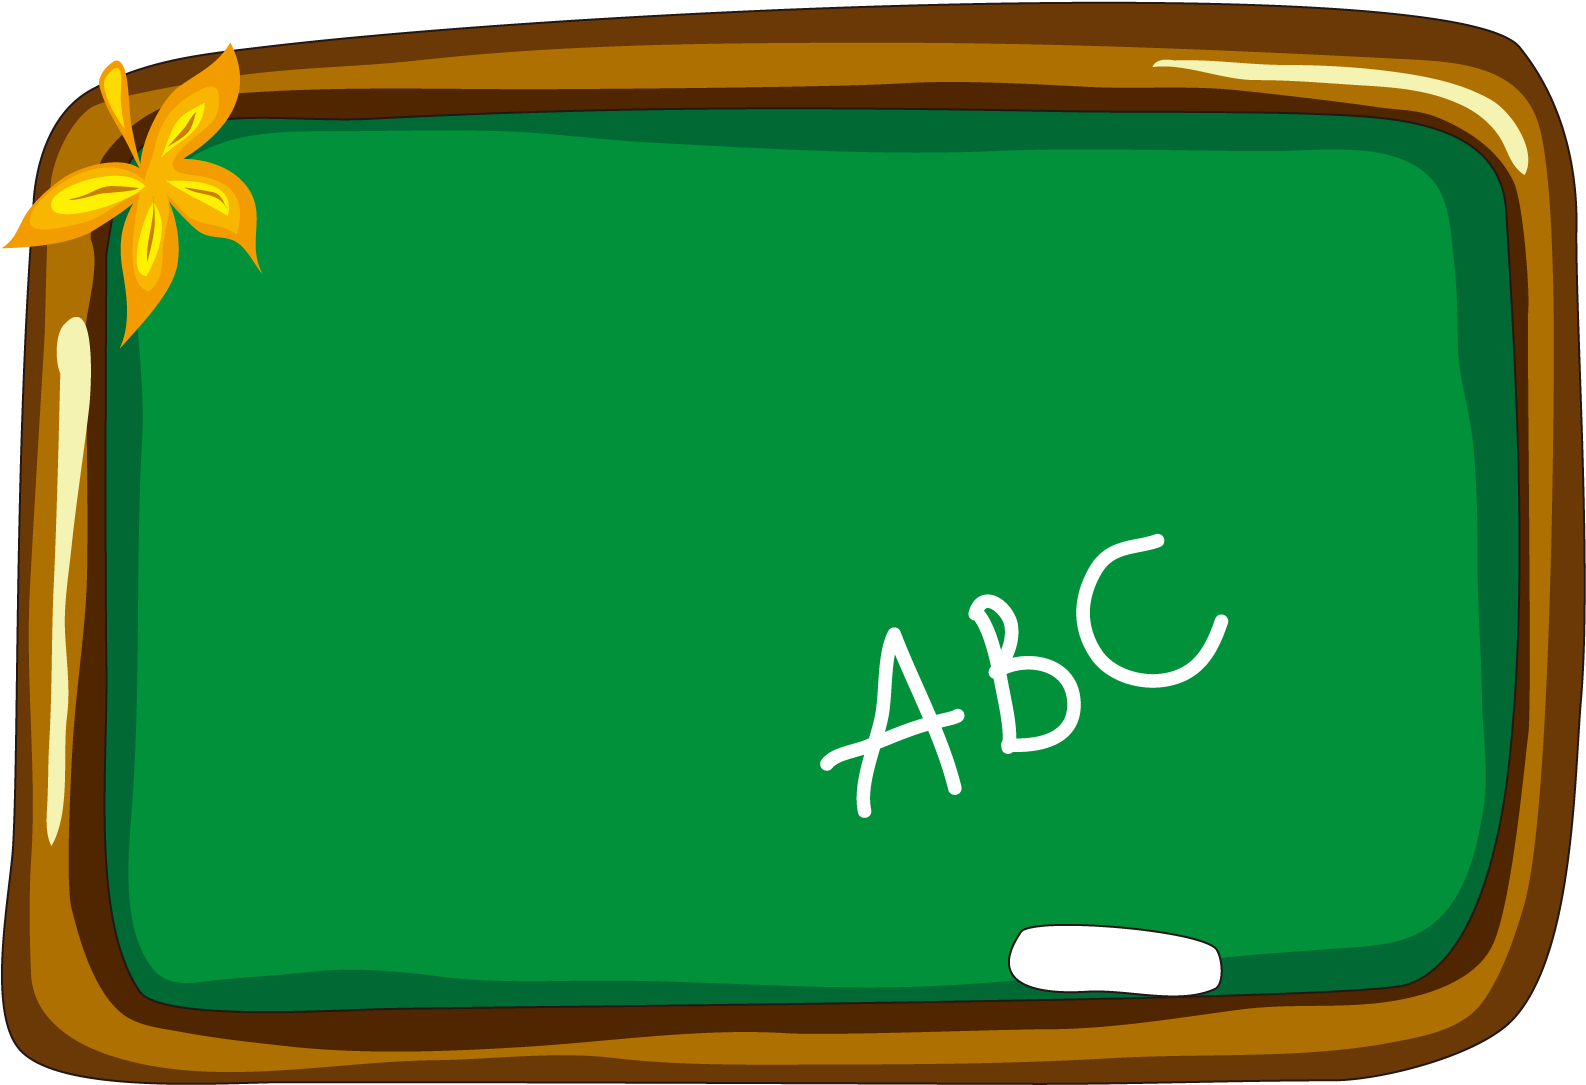 Decorated Classroom Blackboard PNG image